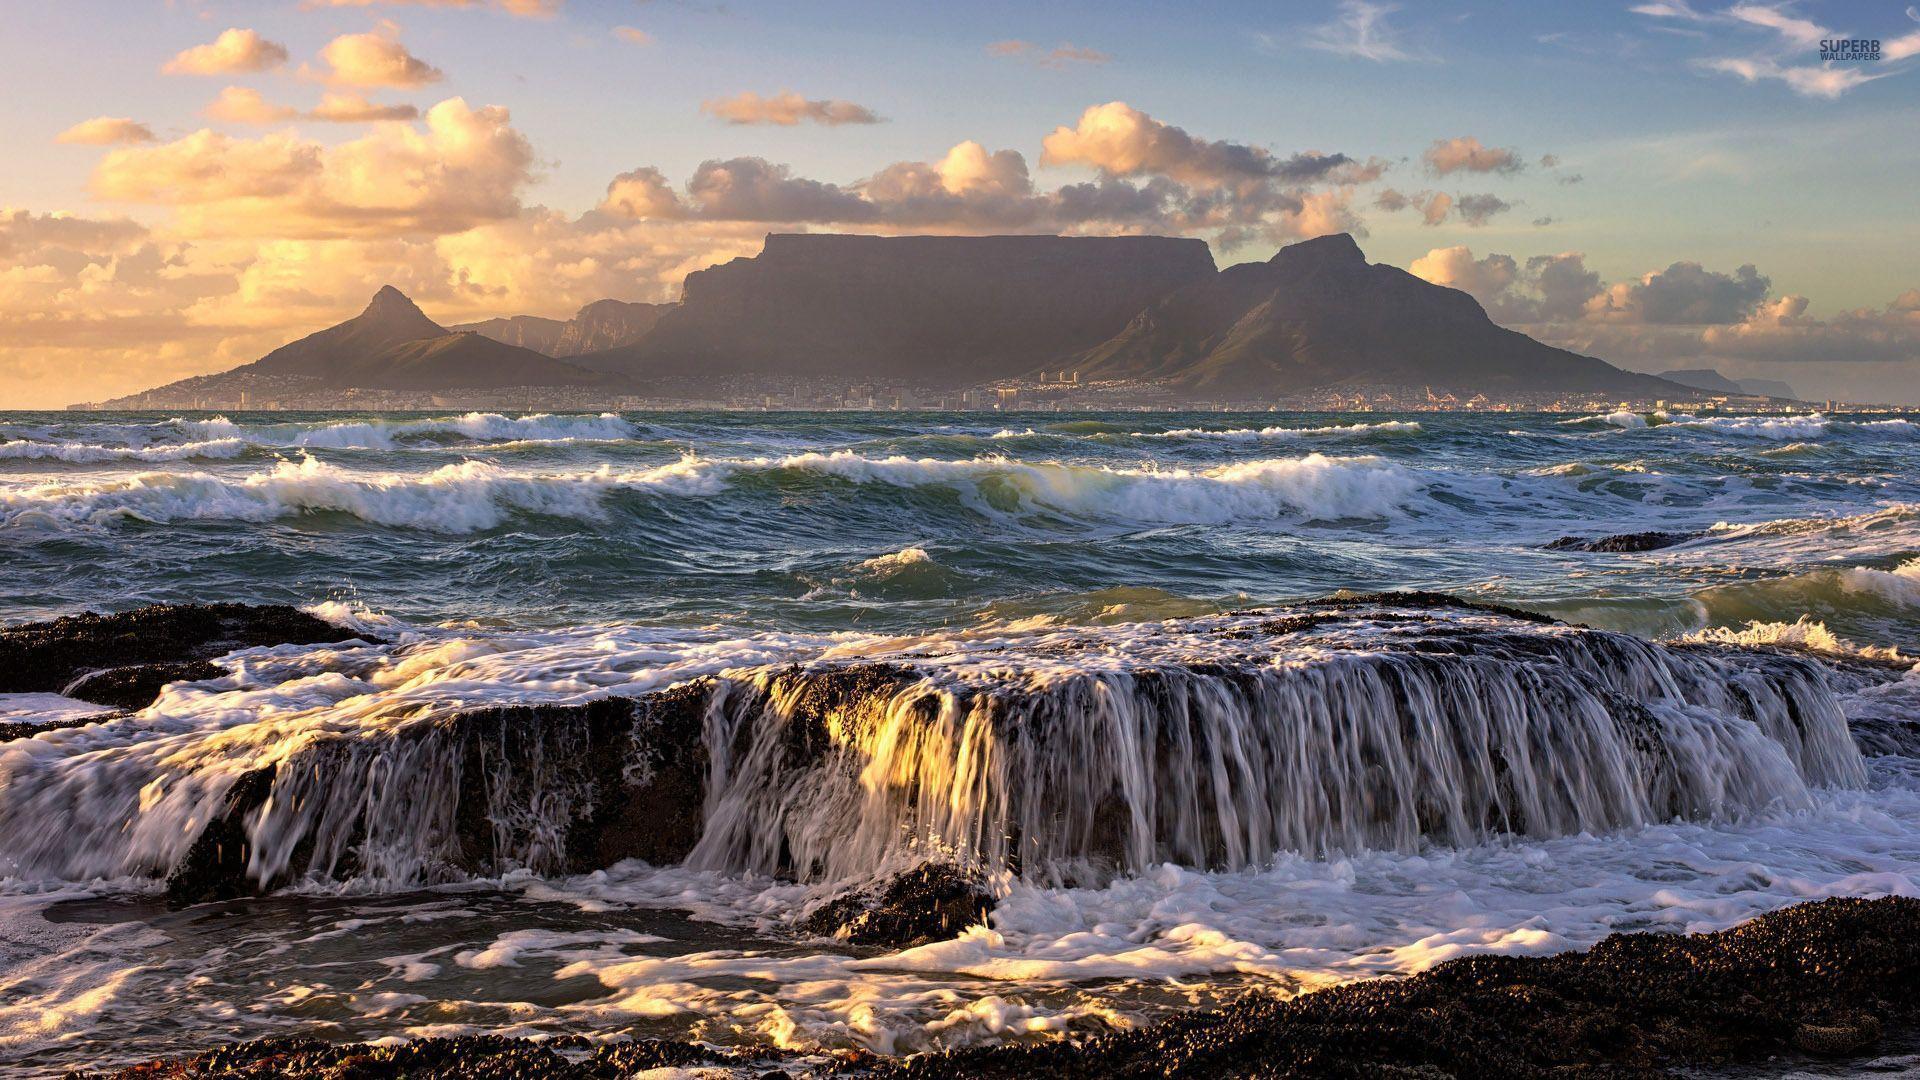 Cape Town South Africa HD Wallpaperx1080